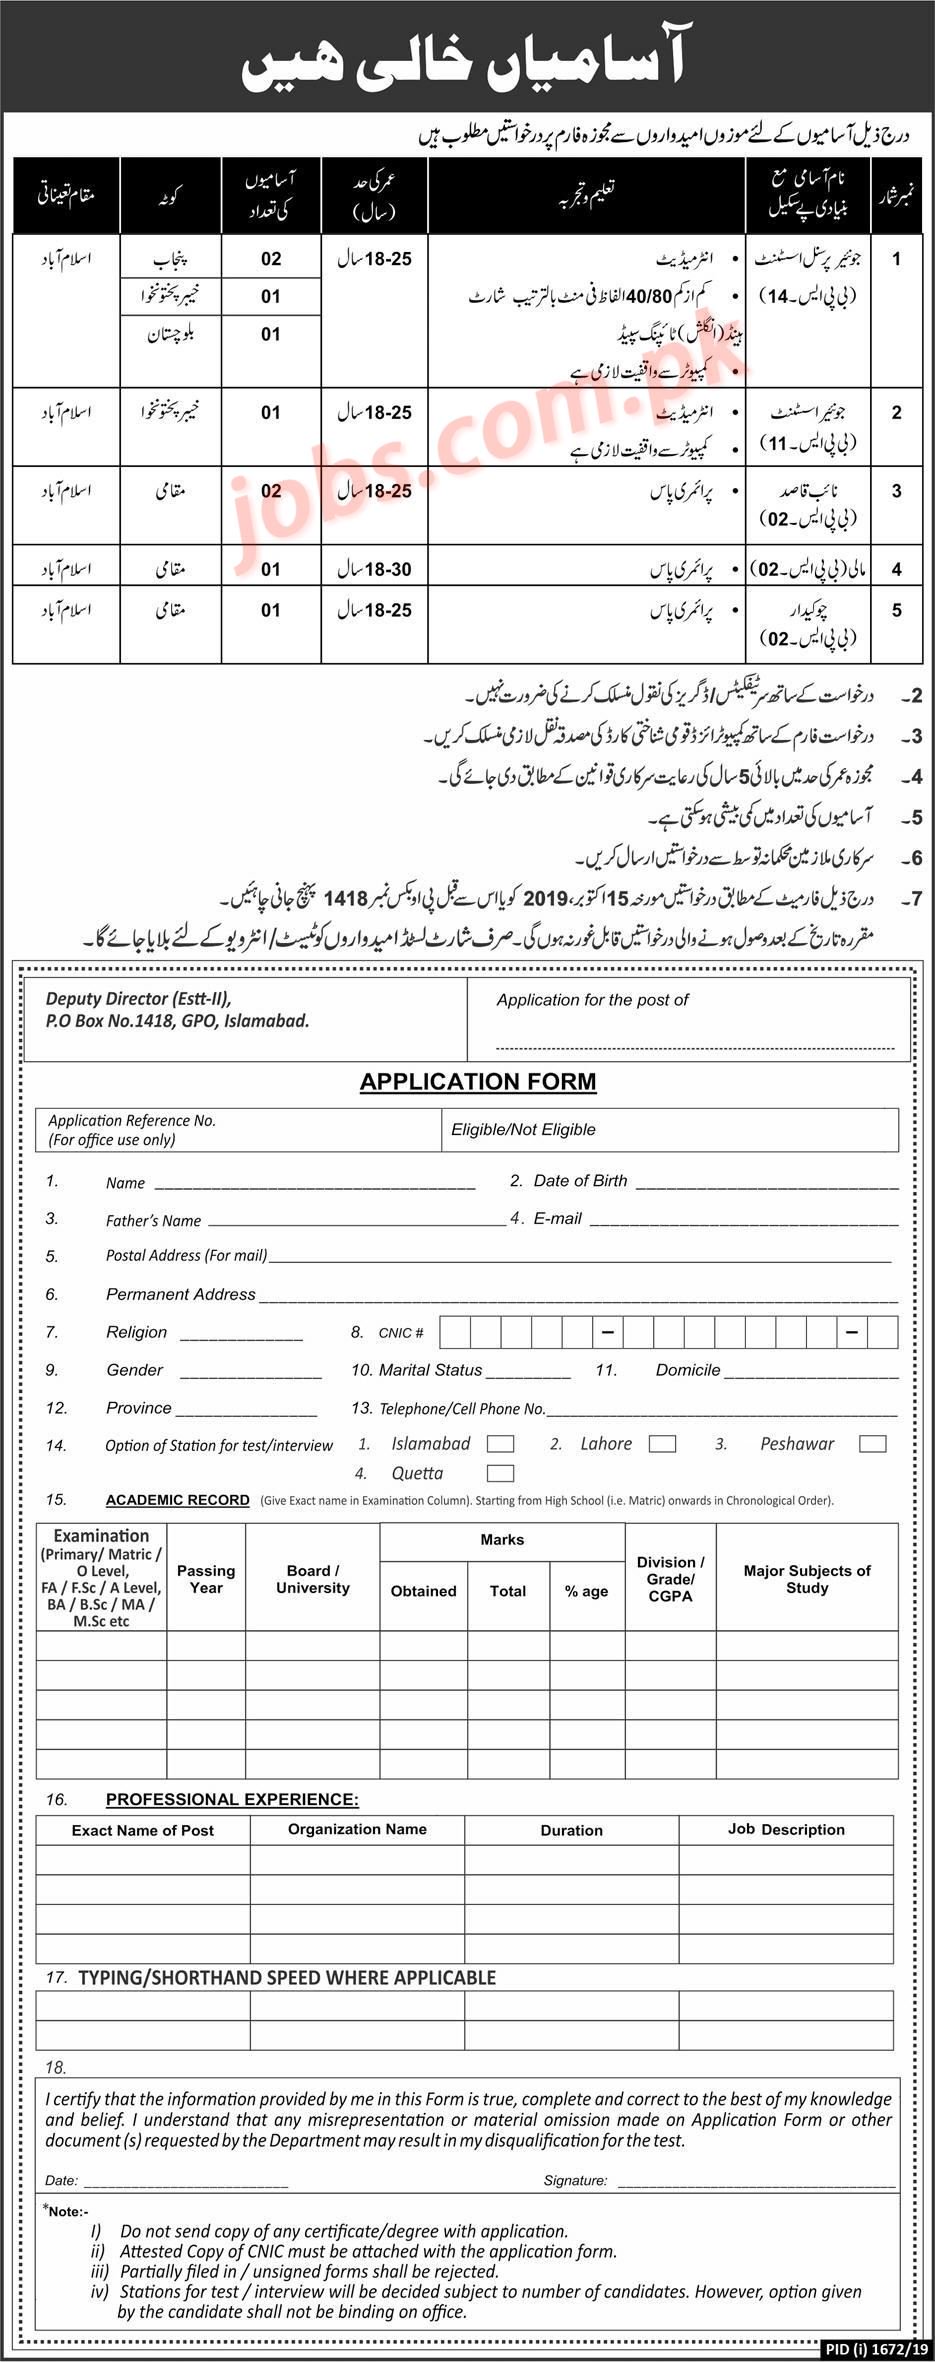 Election Commission Pakistan (ECP) Jobs 2019 For Junior Assistants, Jr Personal Assistants, Naib Qasid & Other 